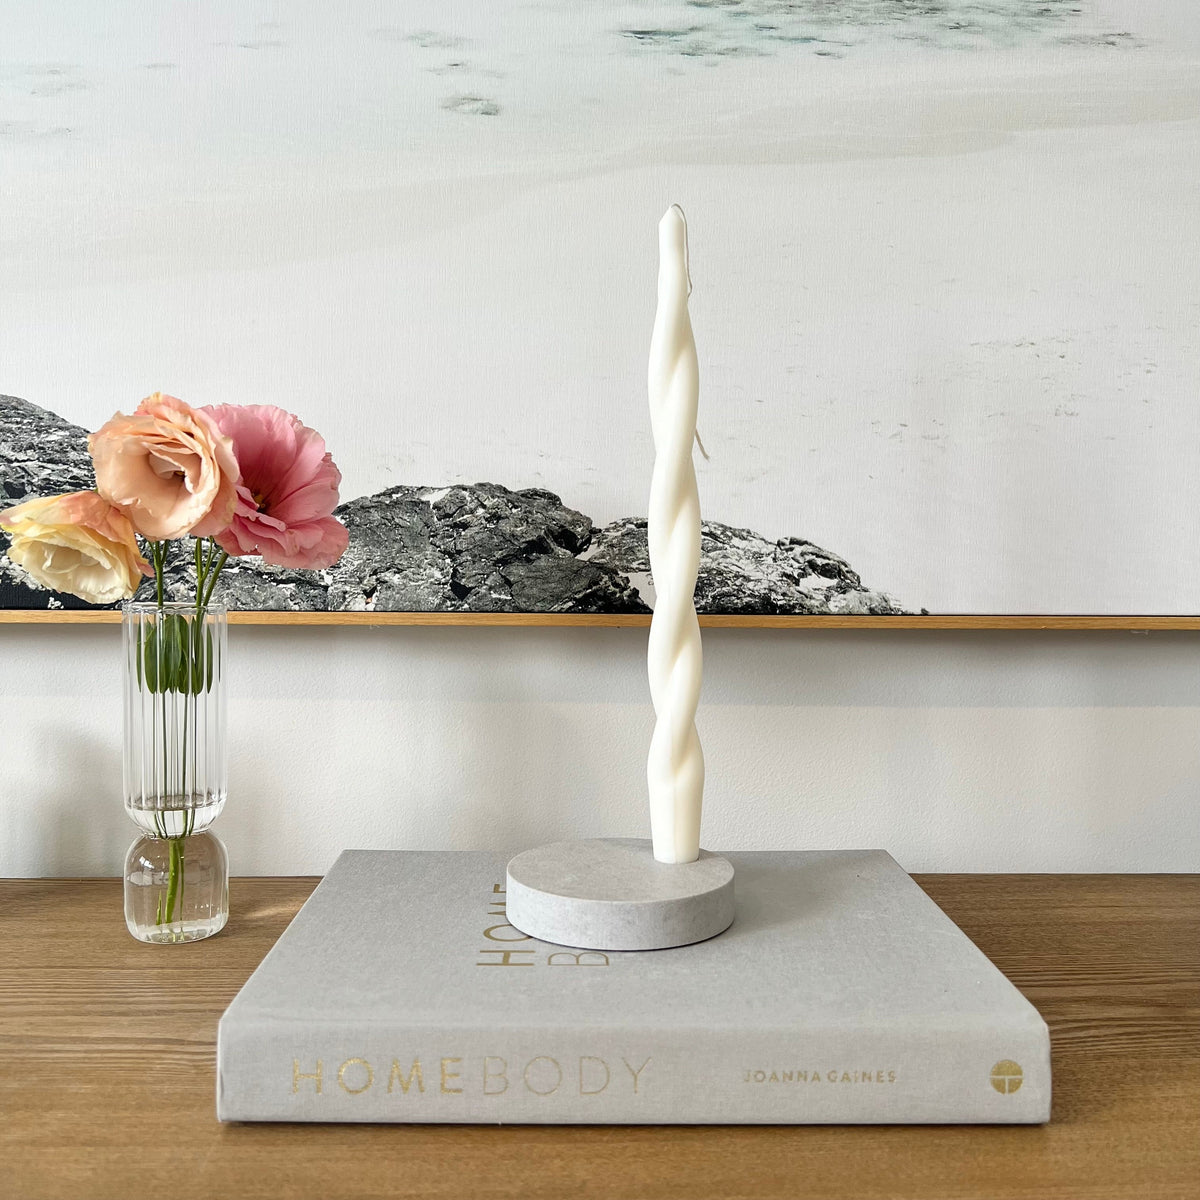 Quartz Round Single Candle Holder in Caesarstone Airy Concrete created by Aureliia Collection. Styled with Studio McKenna Chunky Twist Taper pillar candle and vase with flowers on timber table. This candle holder has a feel of concrete in full movement. The perfect home decor item.